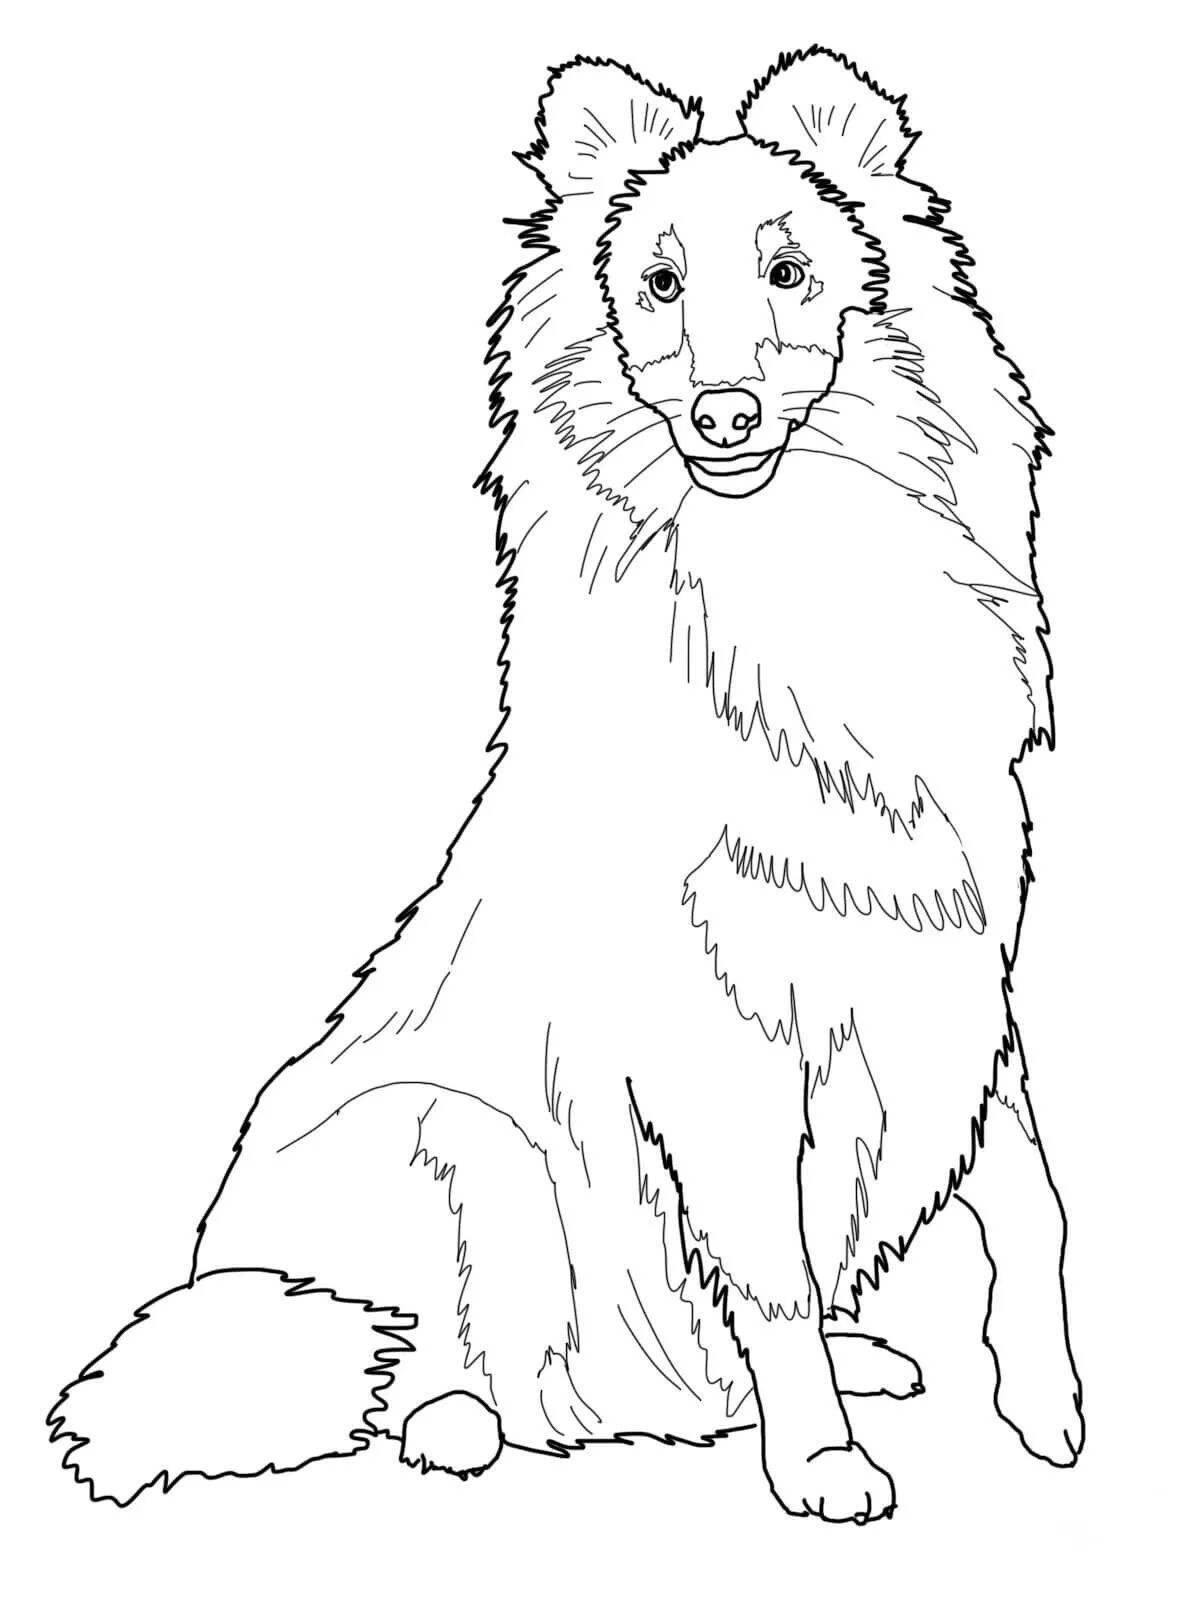 Funny shepherd dog coloring for kids